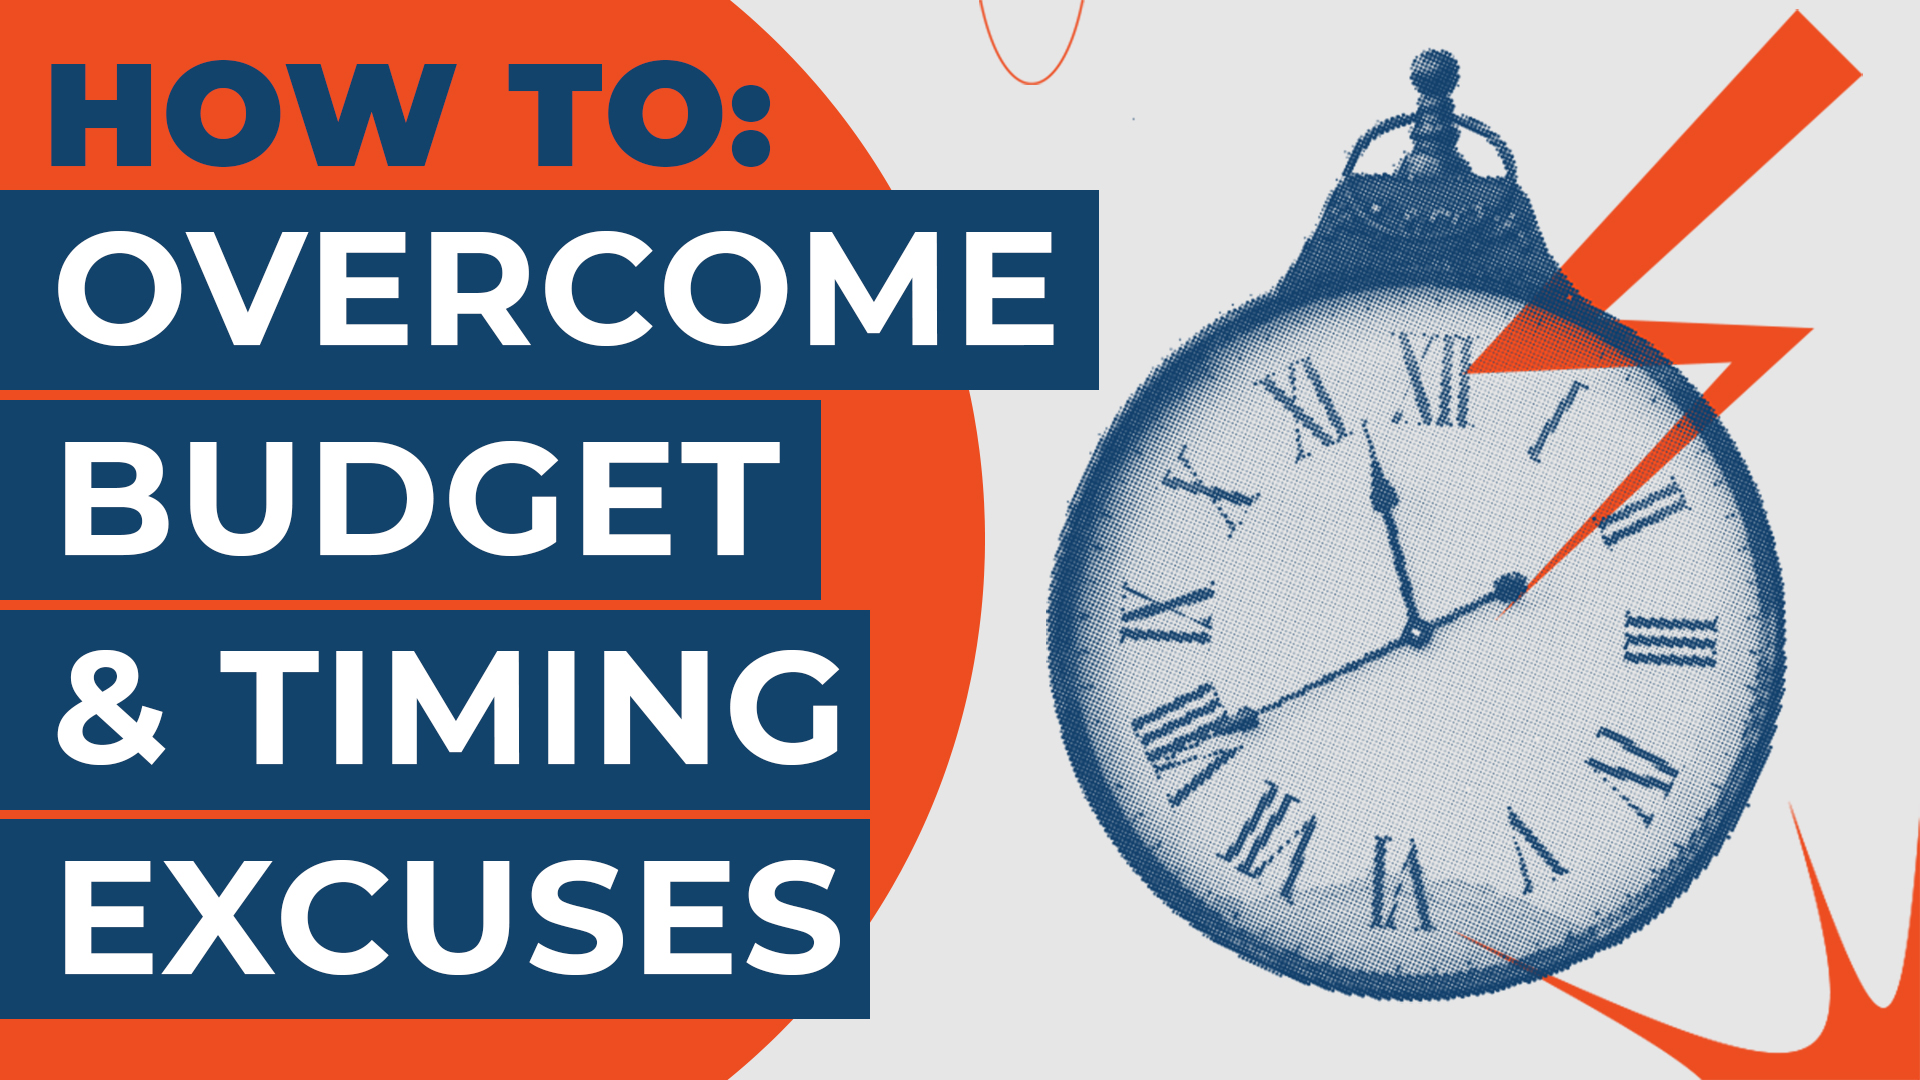 How To: Overcome Budget & Timing Excuses